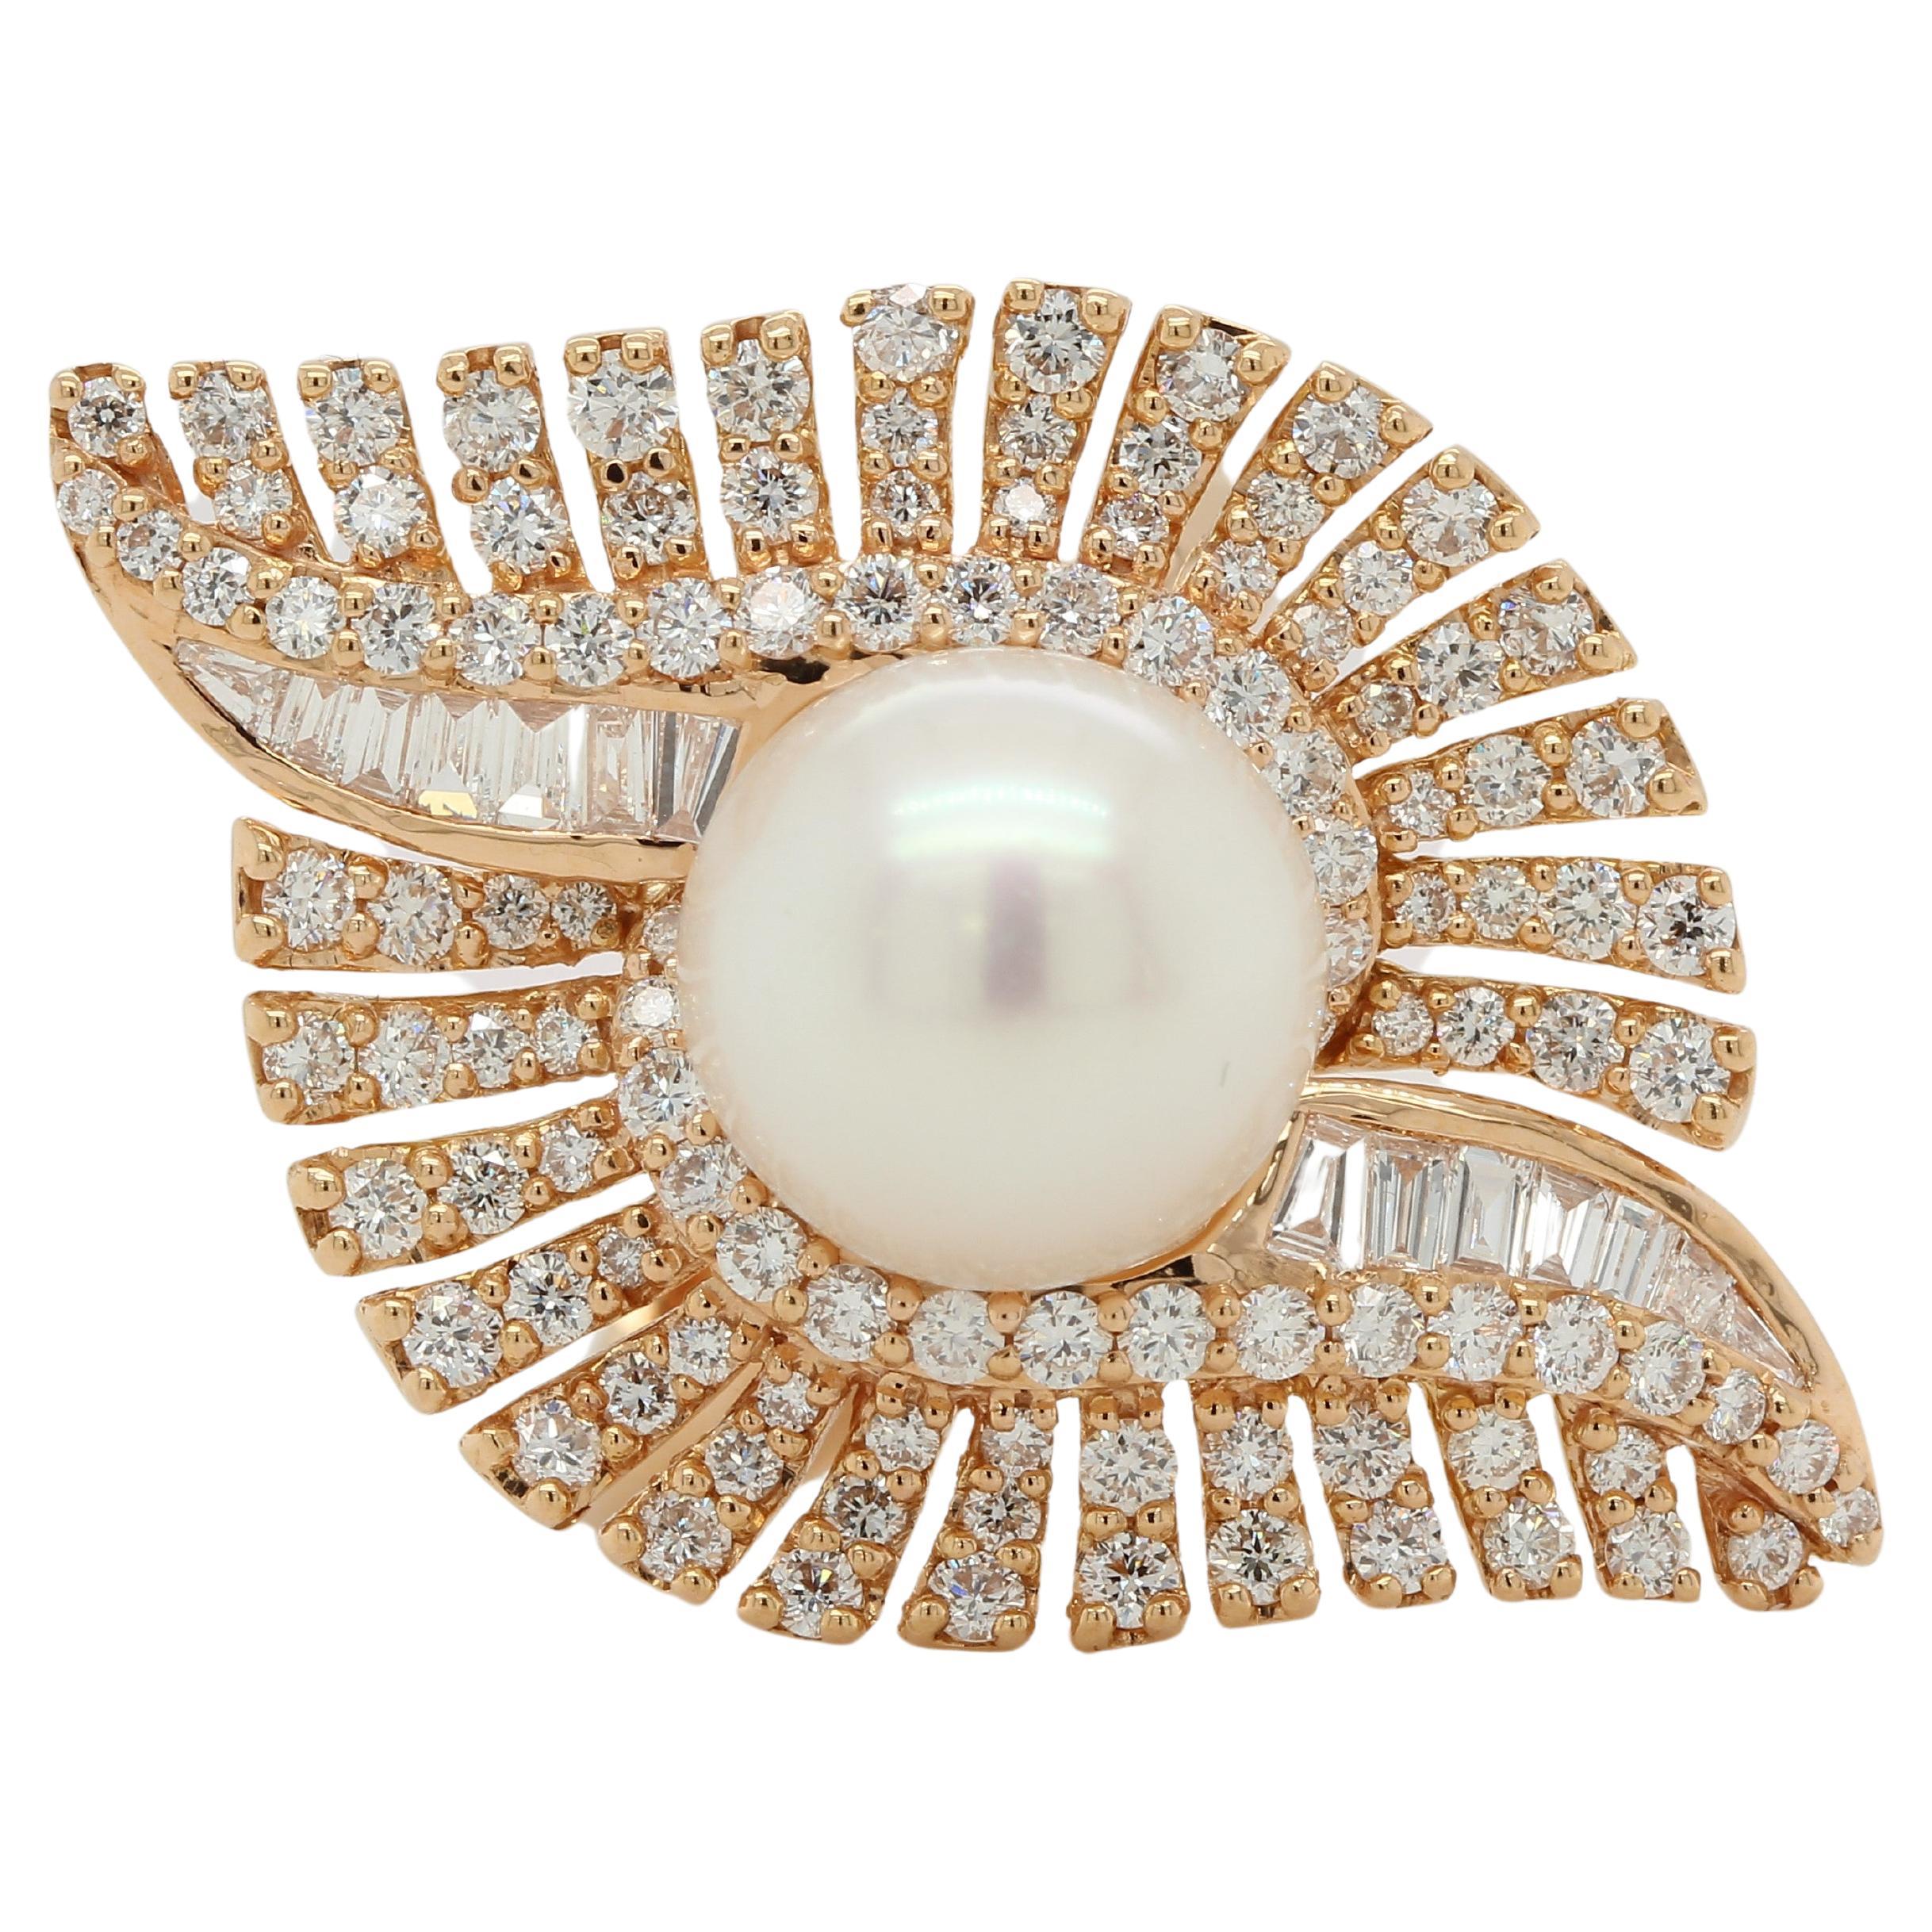 This gorgeous pearl and diamond ring is a luxurious statement piece that will not disappoint. Set in 18K rose gold, the piece features around 1.35 carats of round diamonds and tapper of 0.26 carats. The 7.18 carat pearl makes it easy to appreciate